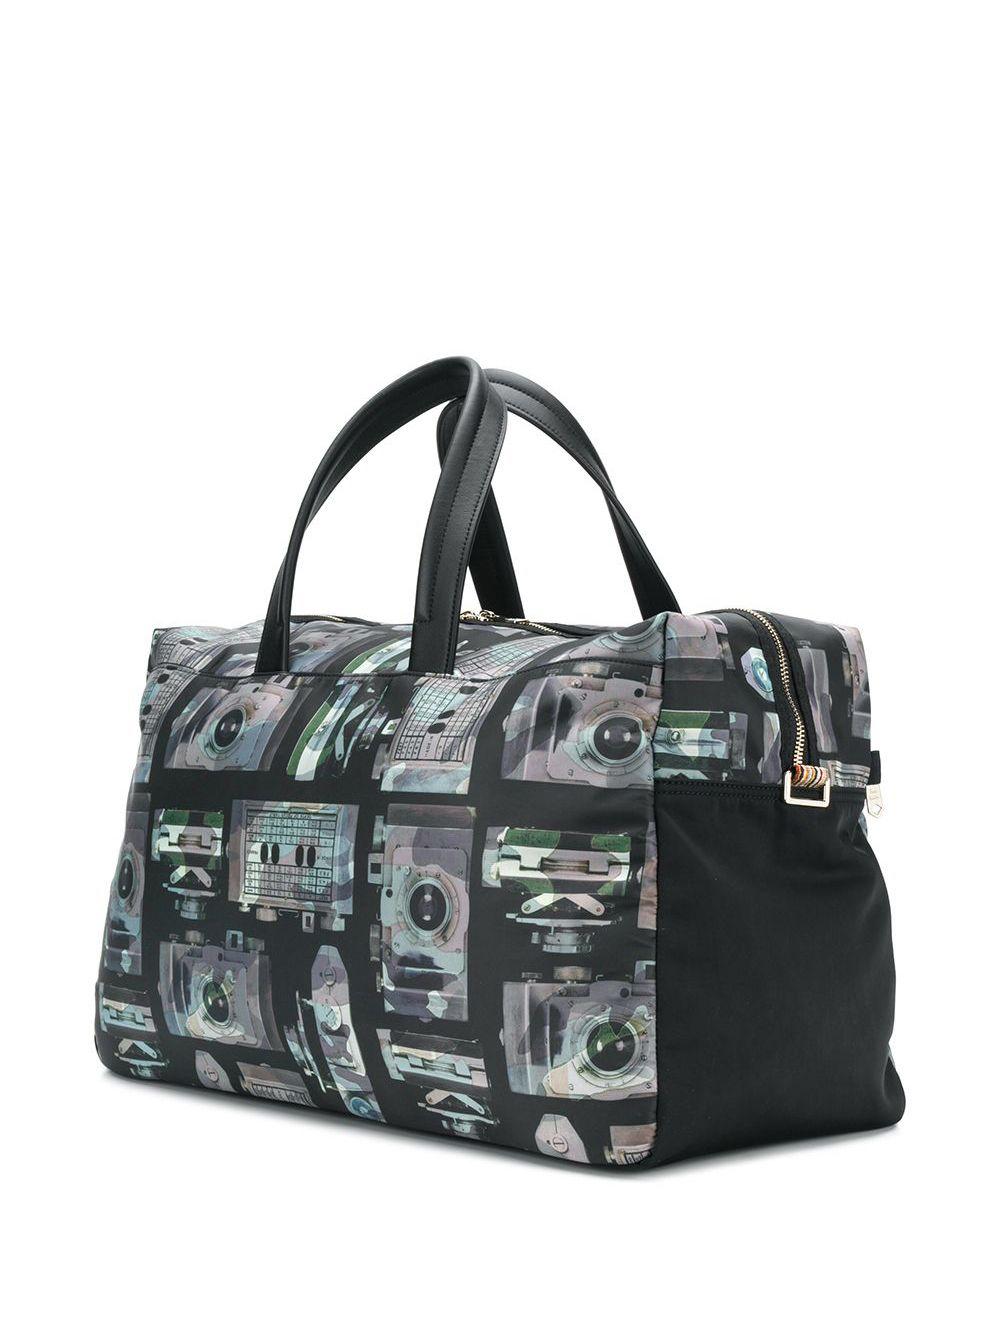 Paul Smith Leather Camera Print Holdall Bag in Black for Men - Lyst